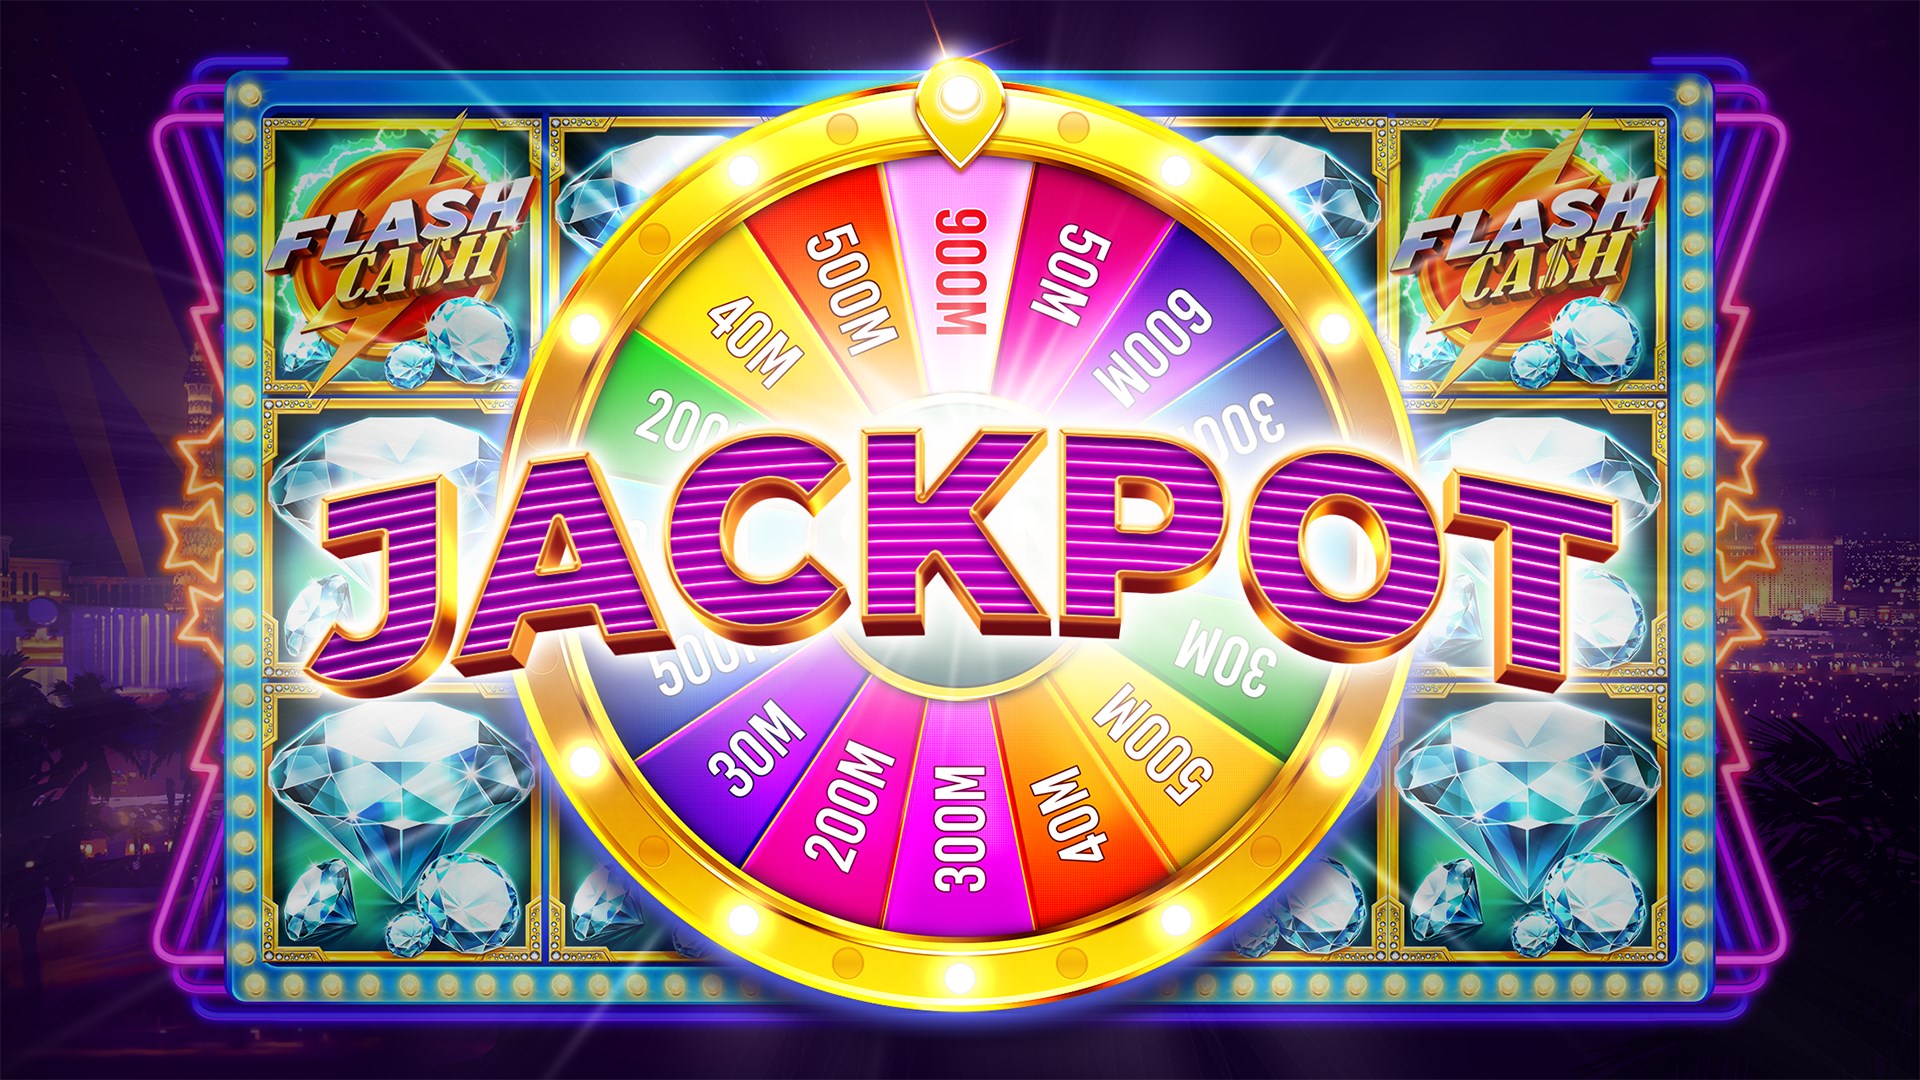 Online Slots Uk - 100 Free Spins Welcome Offer